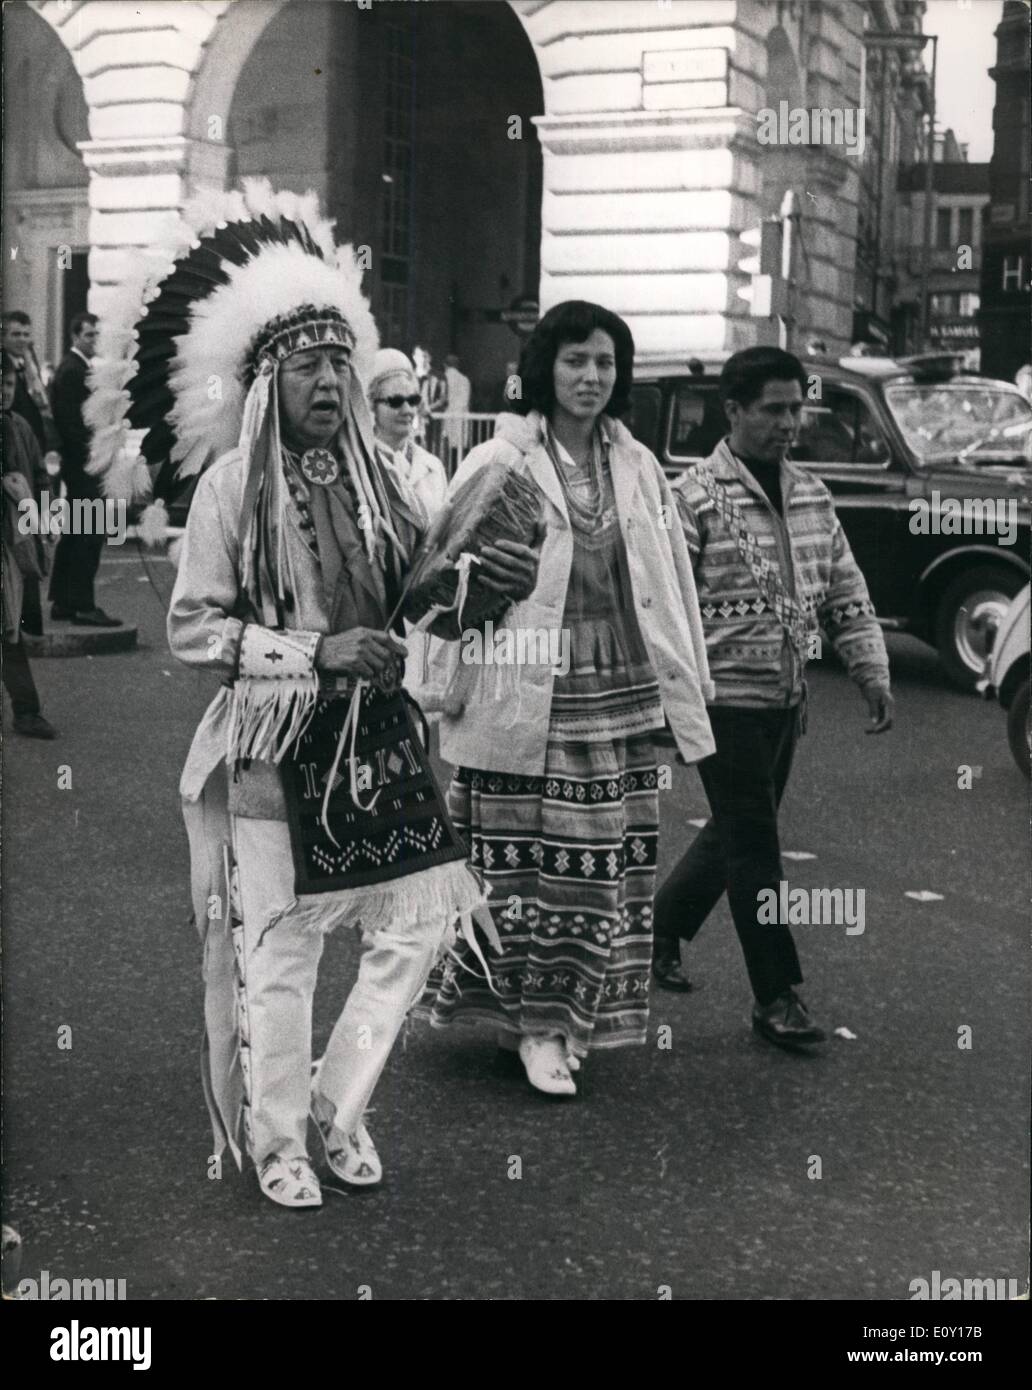 Mar. 03, 1968 - Party of Indians in London on Goodwill visit: Three members of the party of sic Indians who are here for three weeks on a goodwill visit sponsored by the U.S Department of Commerce, were out in London today-in their national costume. the three are Chief Wolf Hunt, full chief of the Acoma Pueblo Indian Tribe. (From Tulsa, Oklahome); Chief Joe Dan Osceola, leader of the seminoles. Great-great grandson of Chief Osceola, famous war chief of the Seminoles when they fought the United States Stock Photo